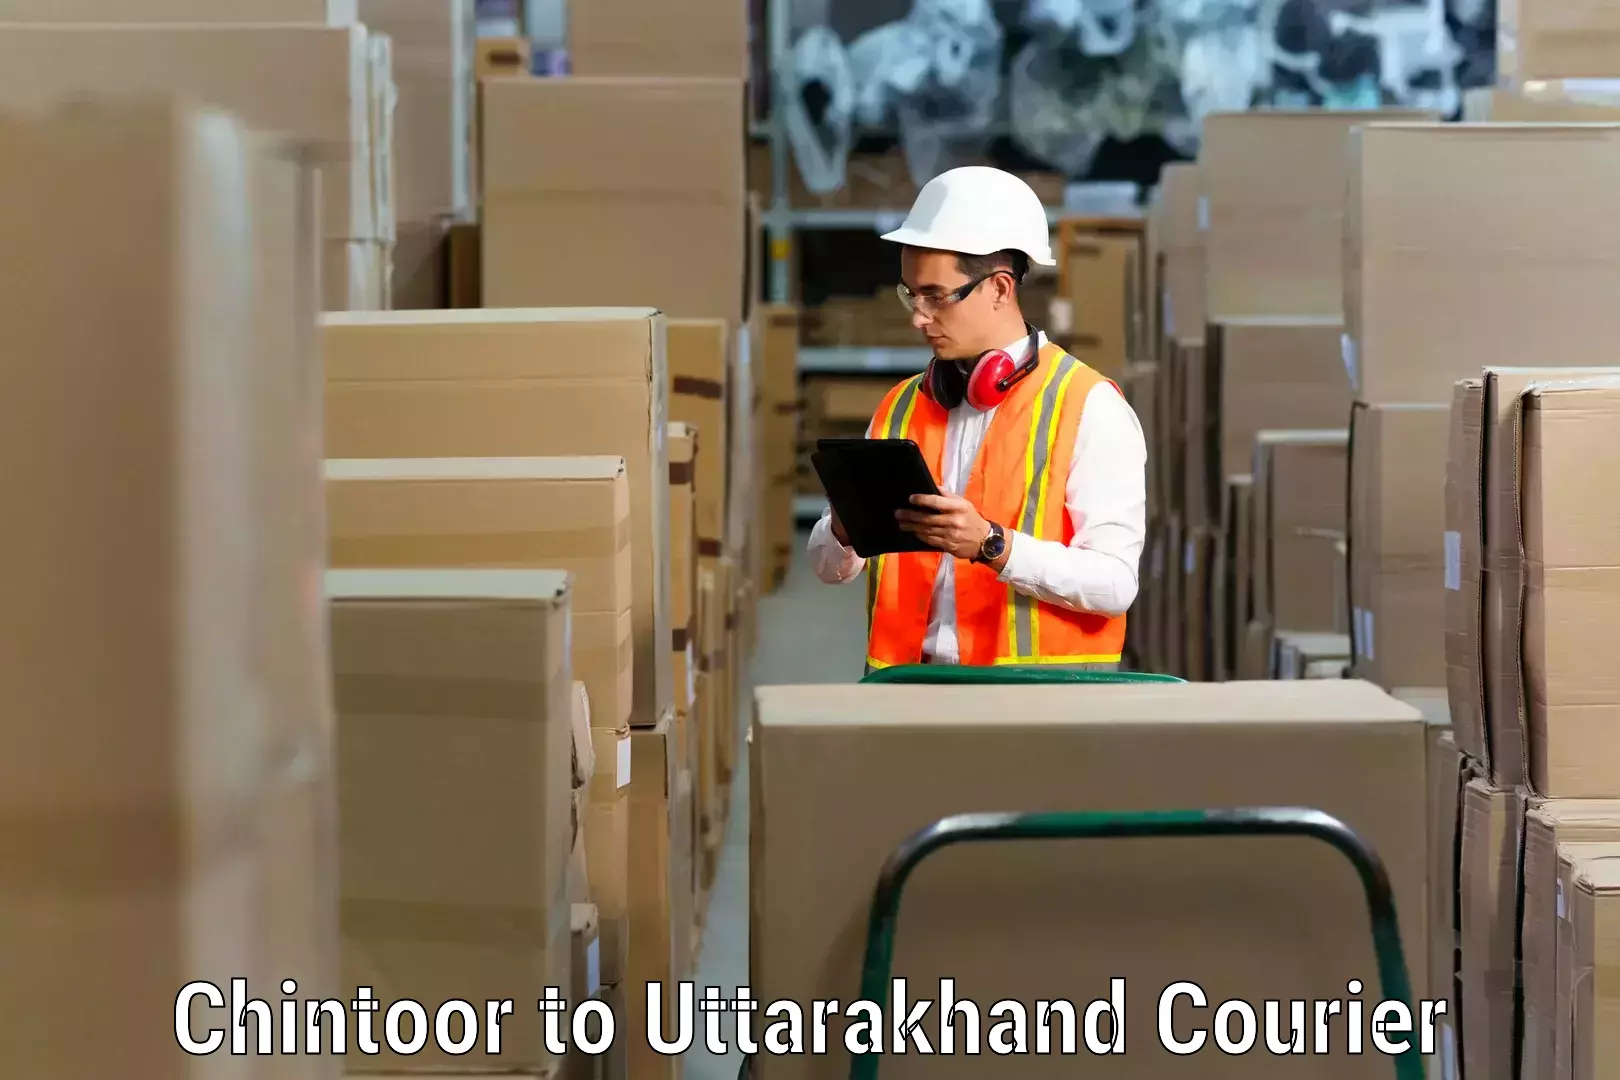 Moving and packing experts Chintoor to Dehradun